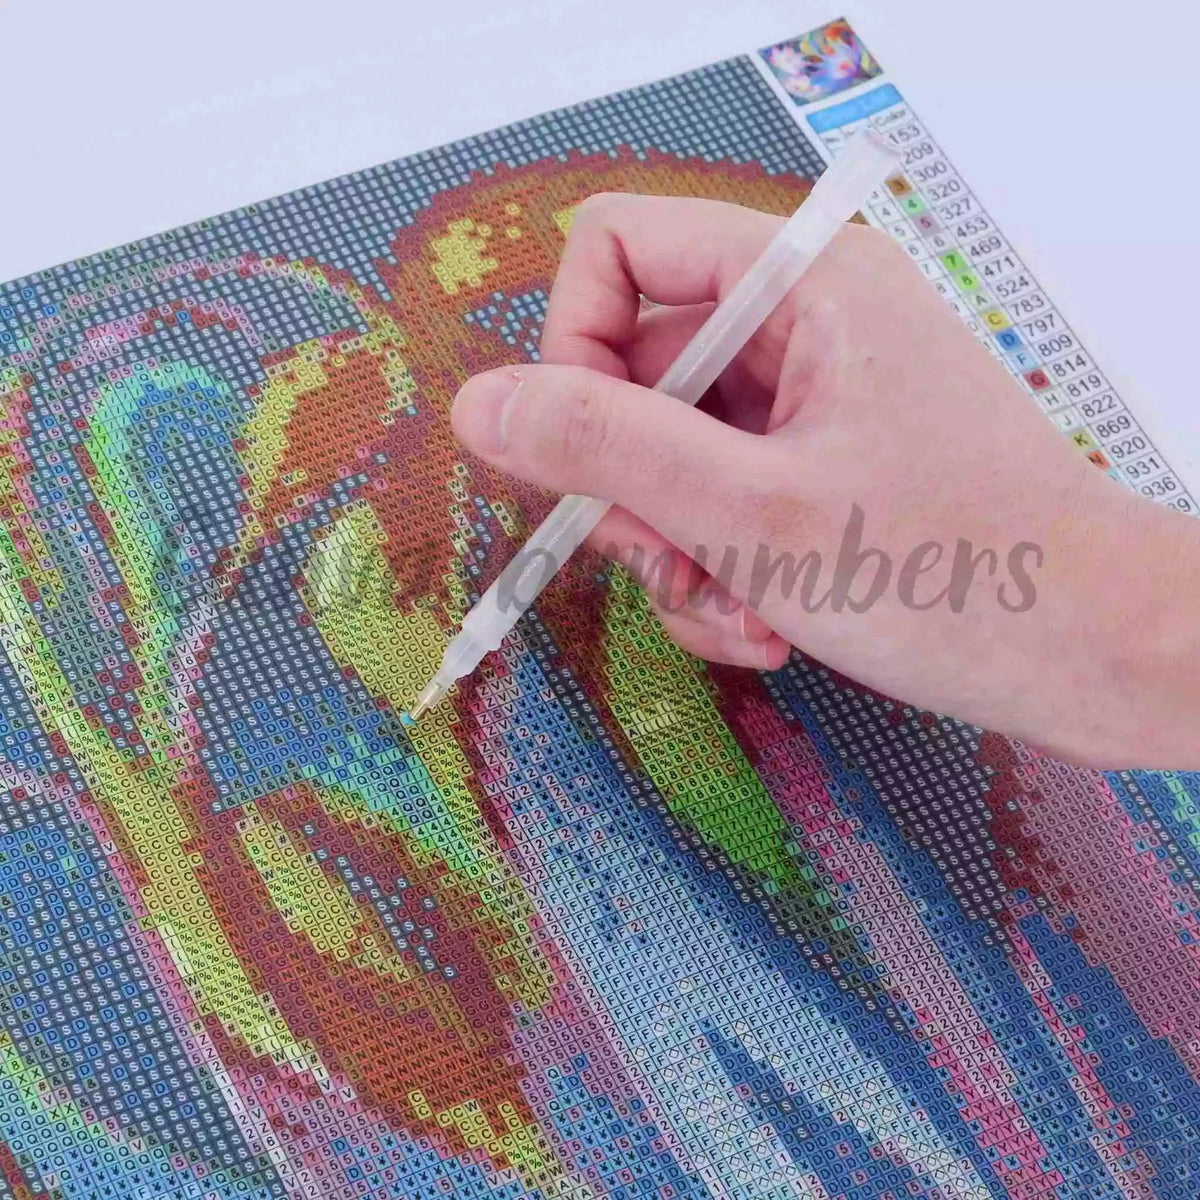 Acceptance - Diamond Painting Kit-Diamond Painting-16"x20" (40x50cm)-Canvas by Numbers US